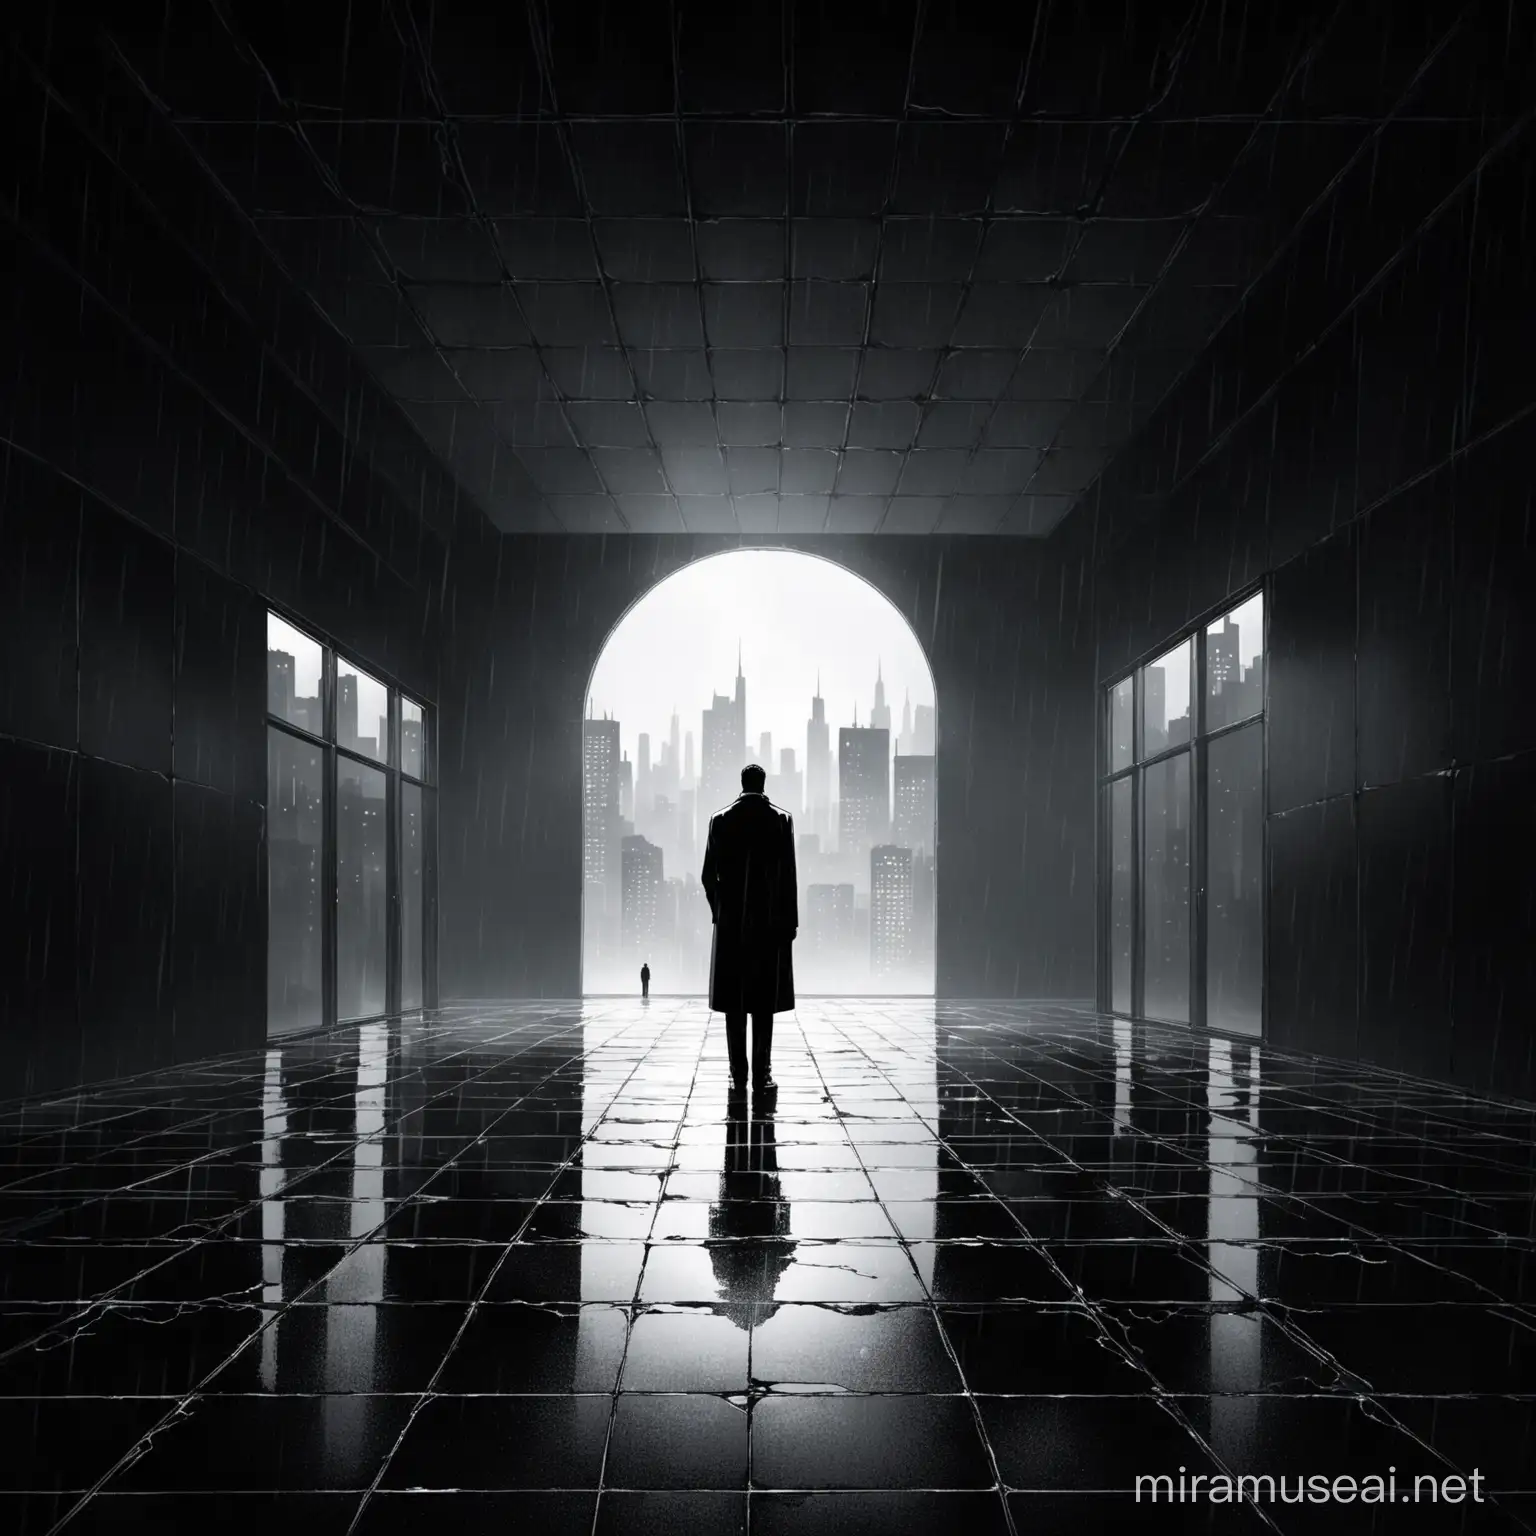 Lonely Man in Noir Cityscape Ethereal Black and White Album Cover Art